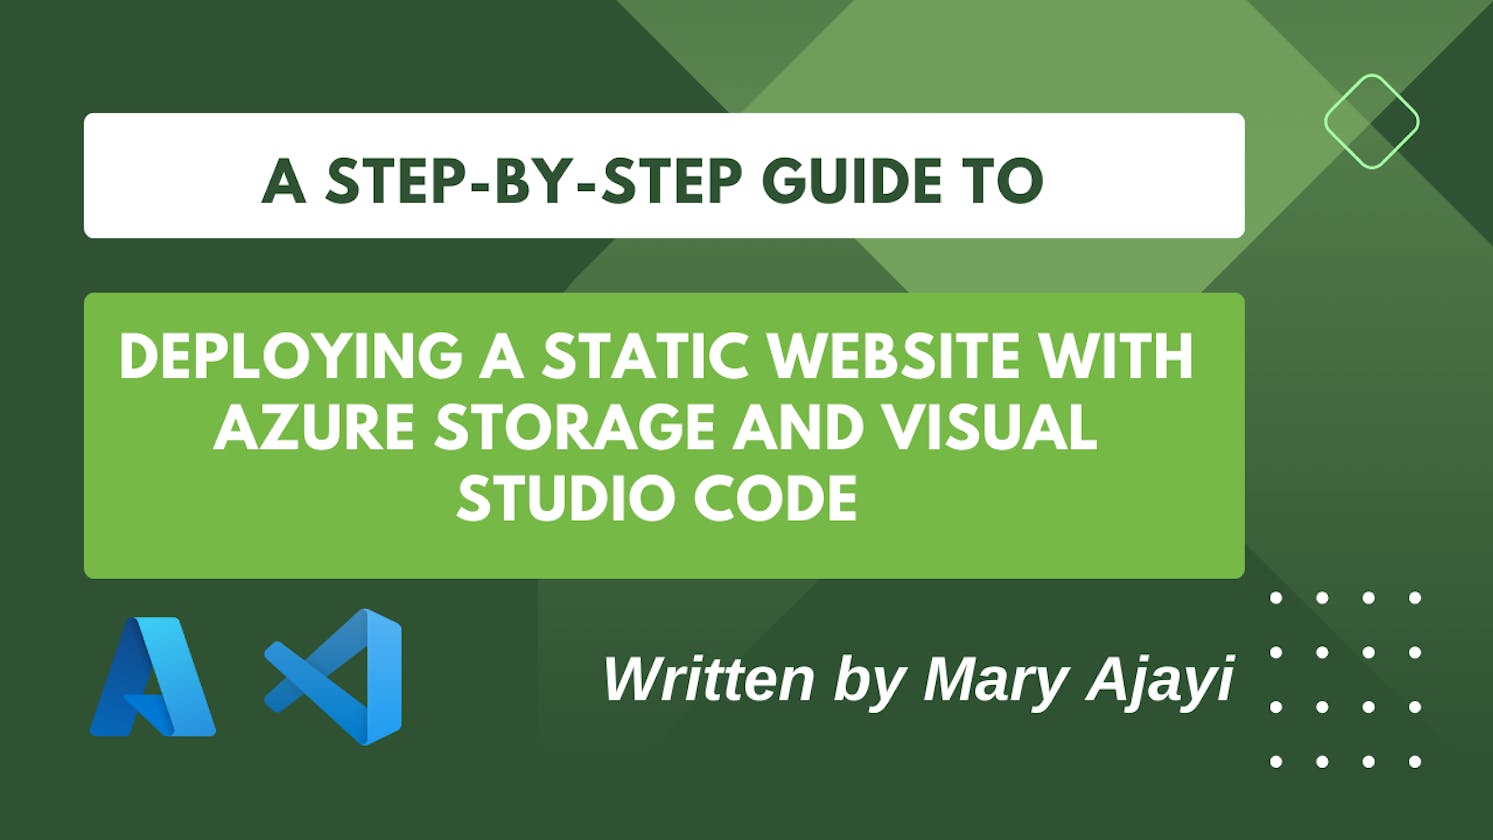 A Step-by-Step Guide to Deploying a Static Website with Azure Storage and Visual Studio Code